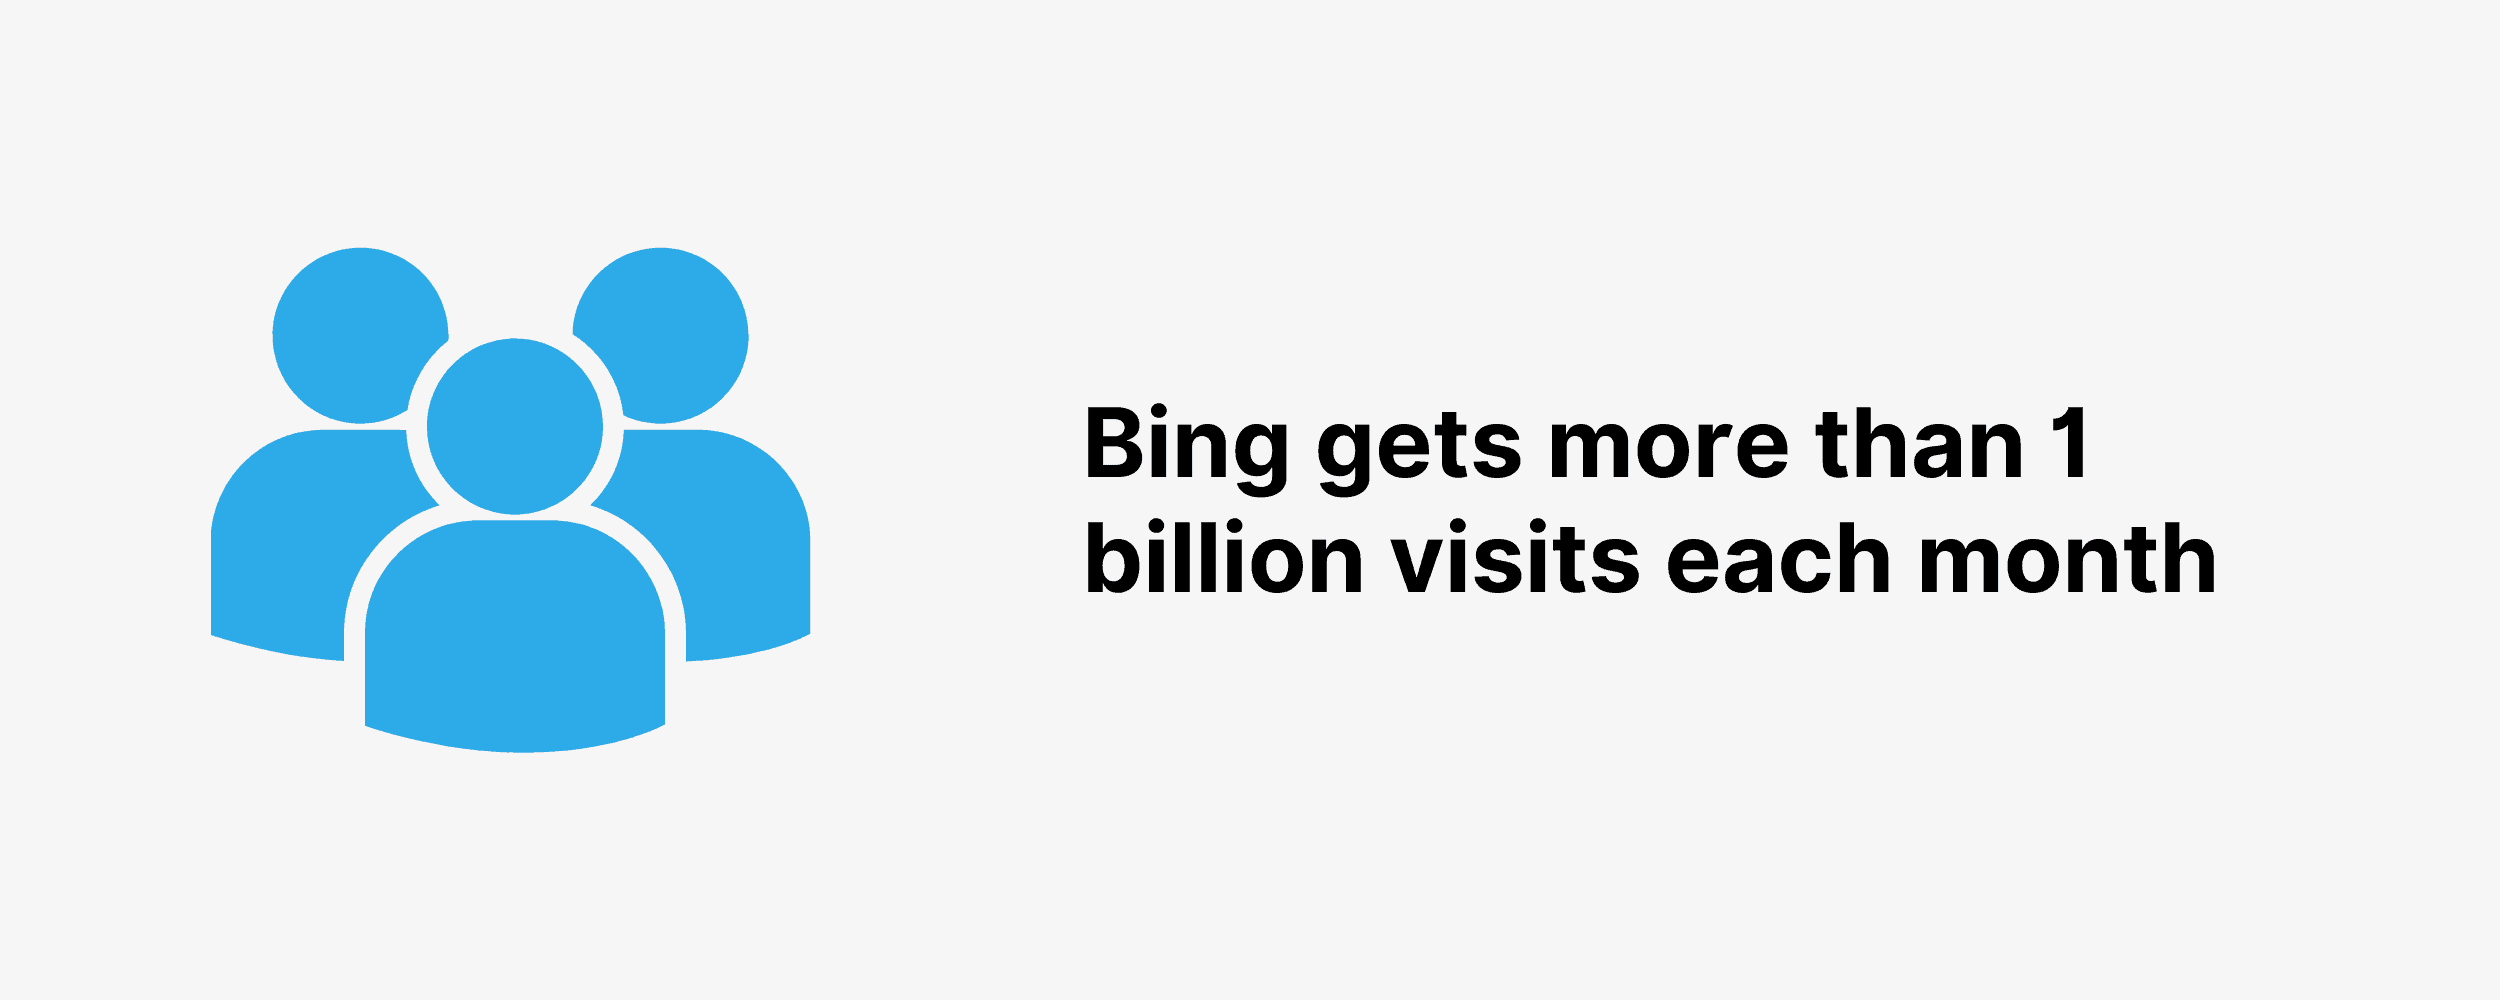 Bing gets more than 1 billion visits each month